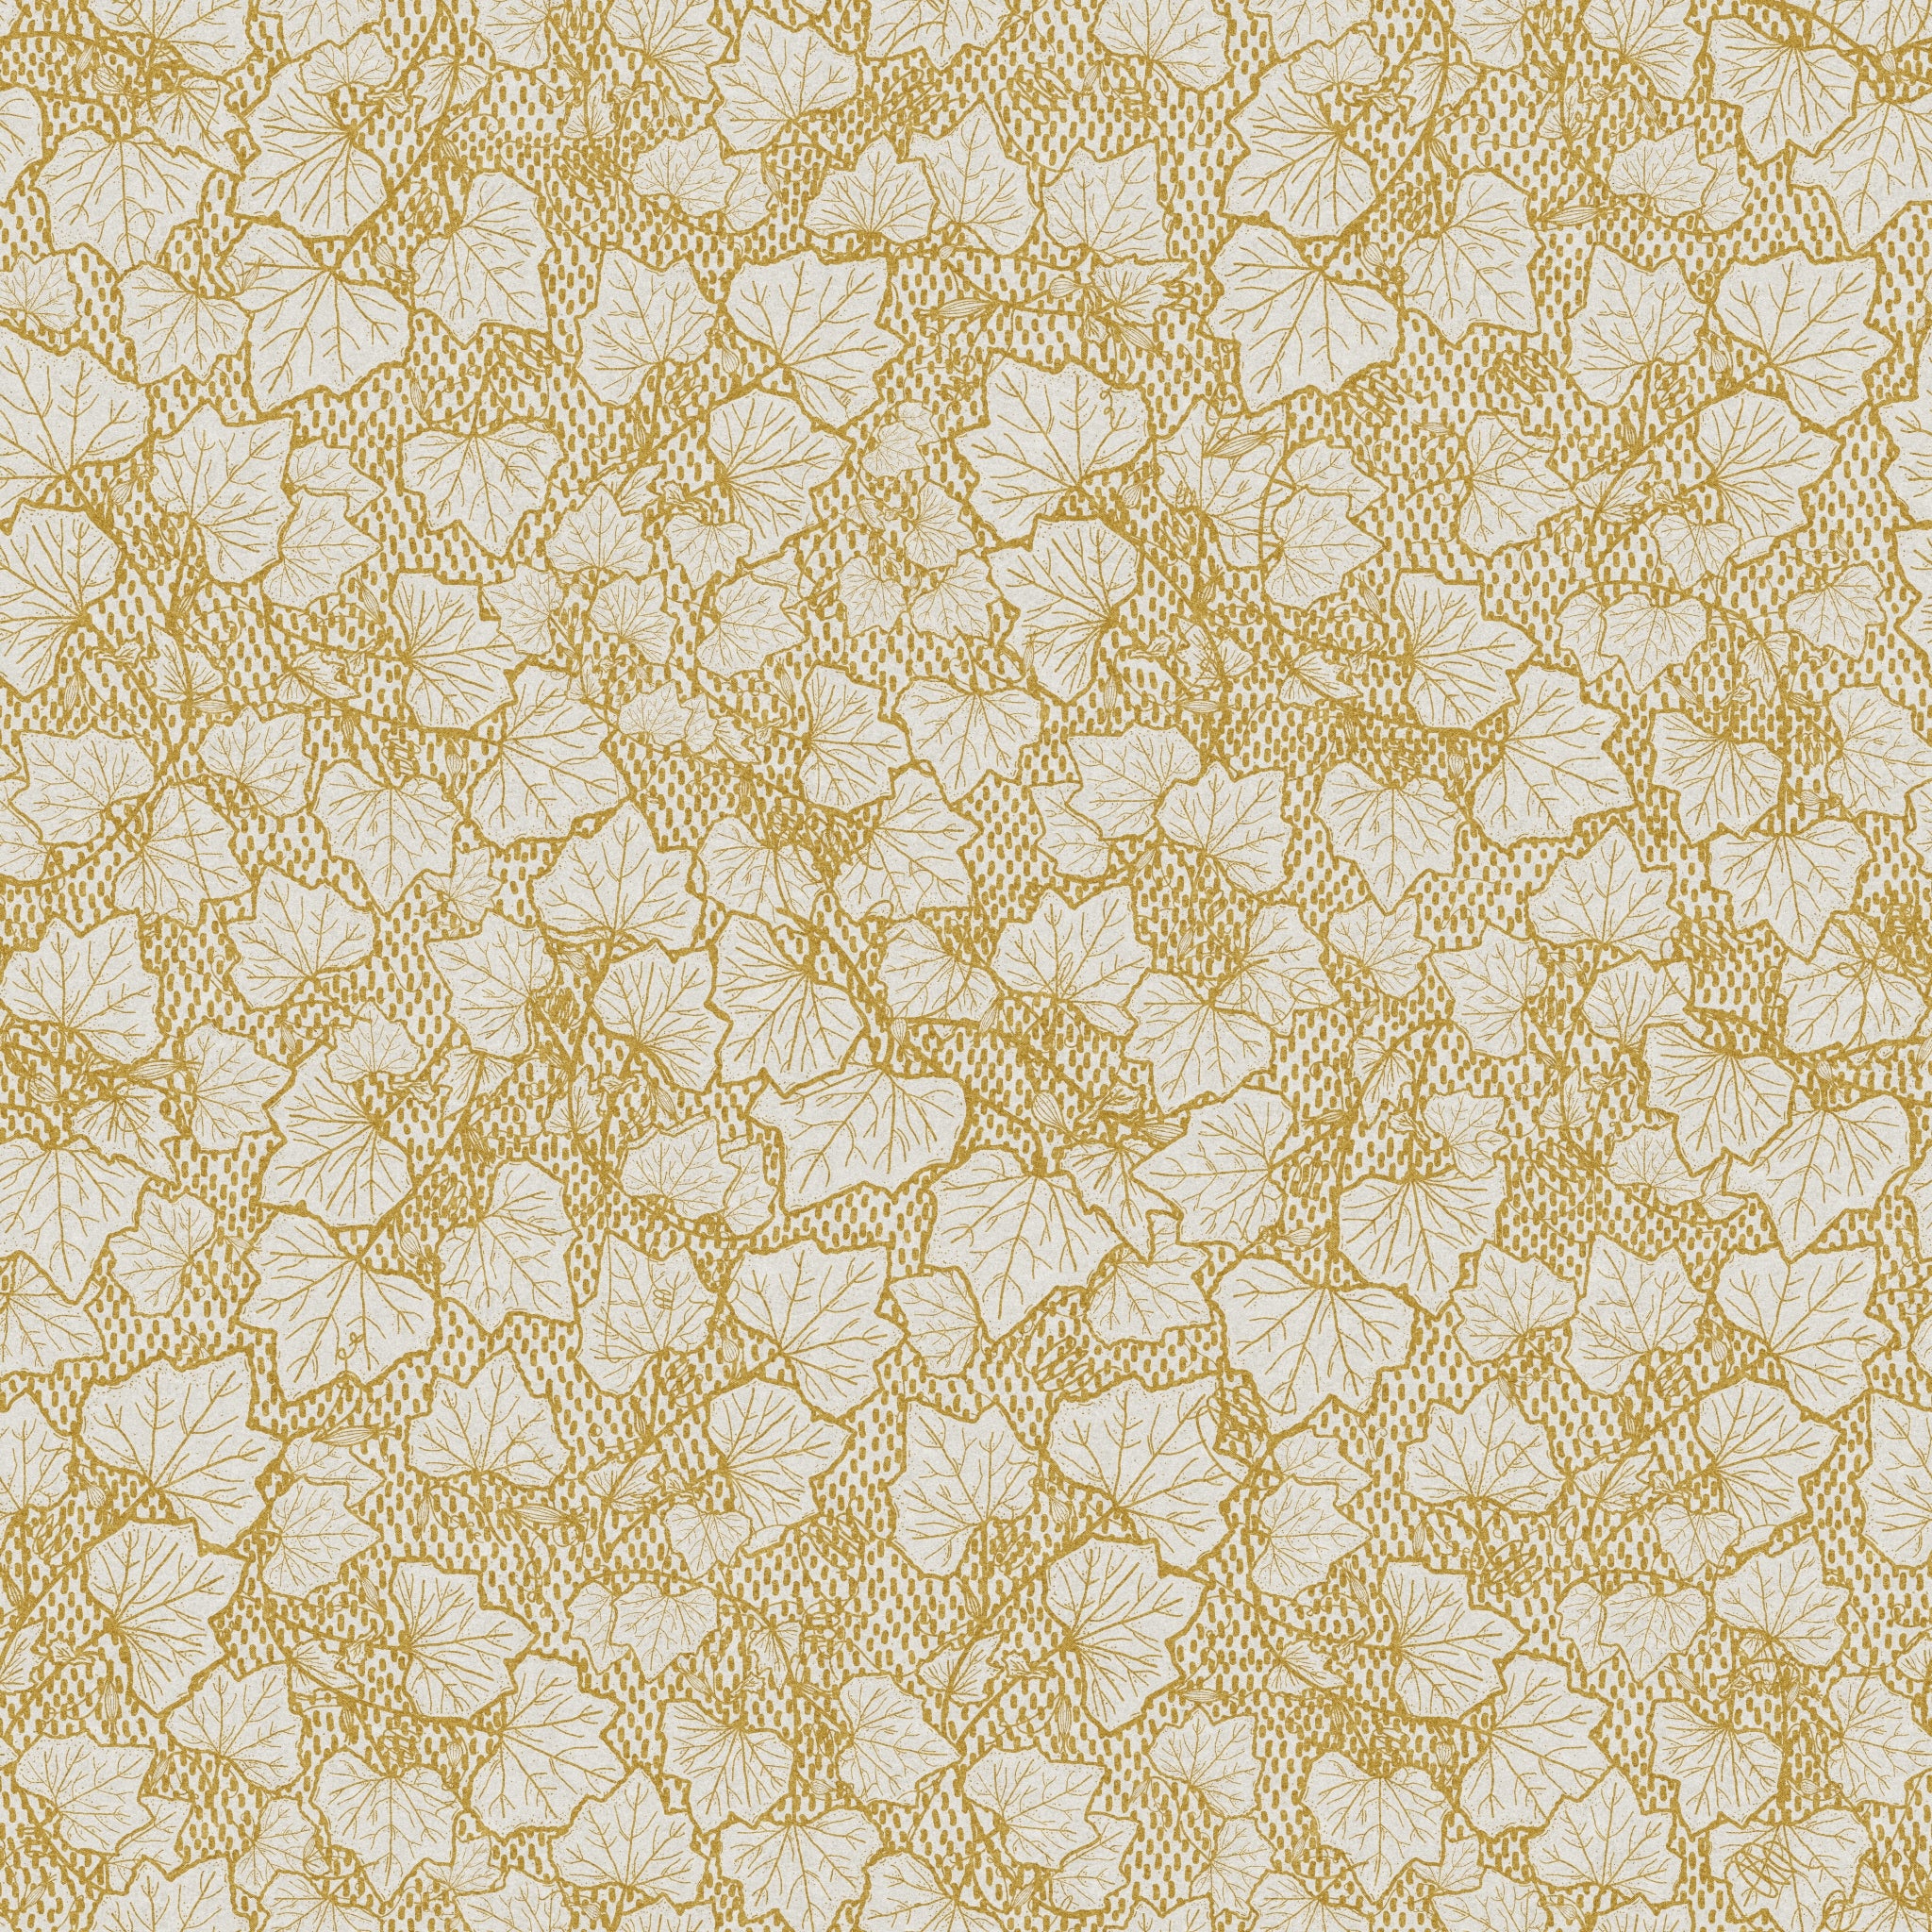 "Heath Wallpaper by Wall Blush with elegant golden leaf patterns installed in a modern living space, focusing on wall decor."